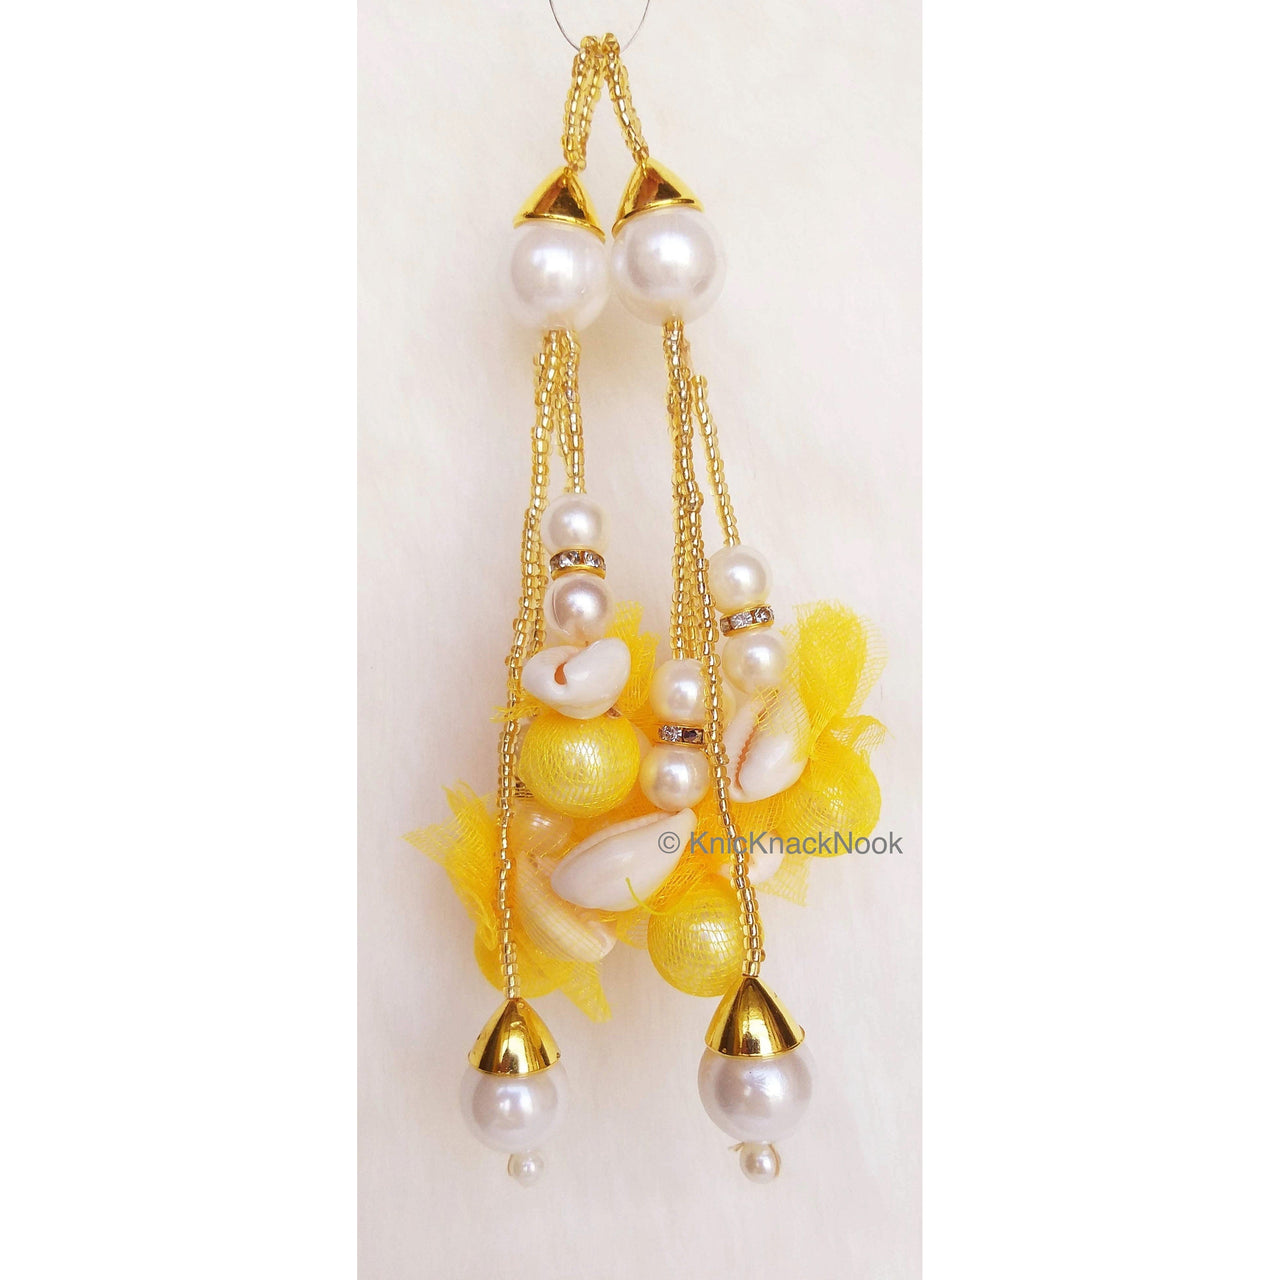 Tassels of Pearl And Cowrie Conch Shell, Pearls And Gold Beads With Net, Indian Tassels